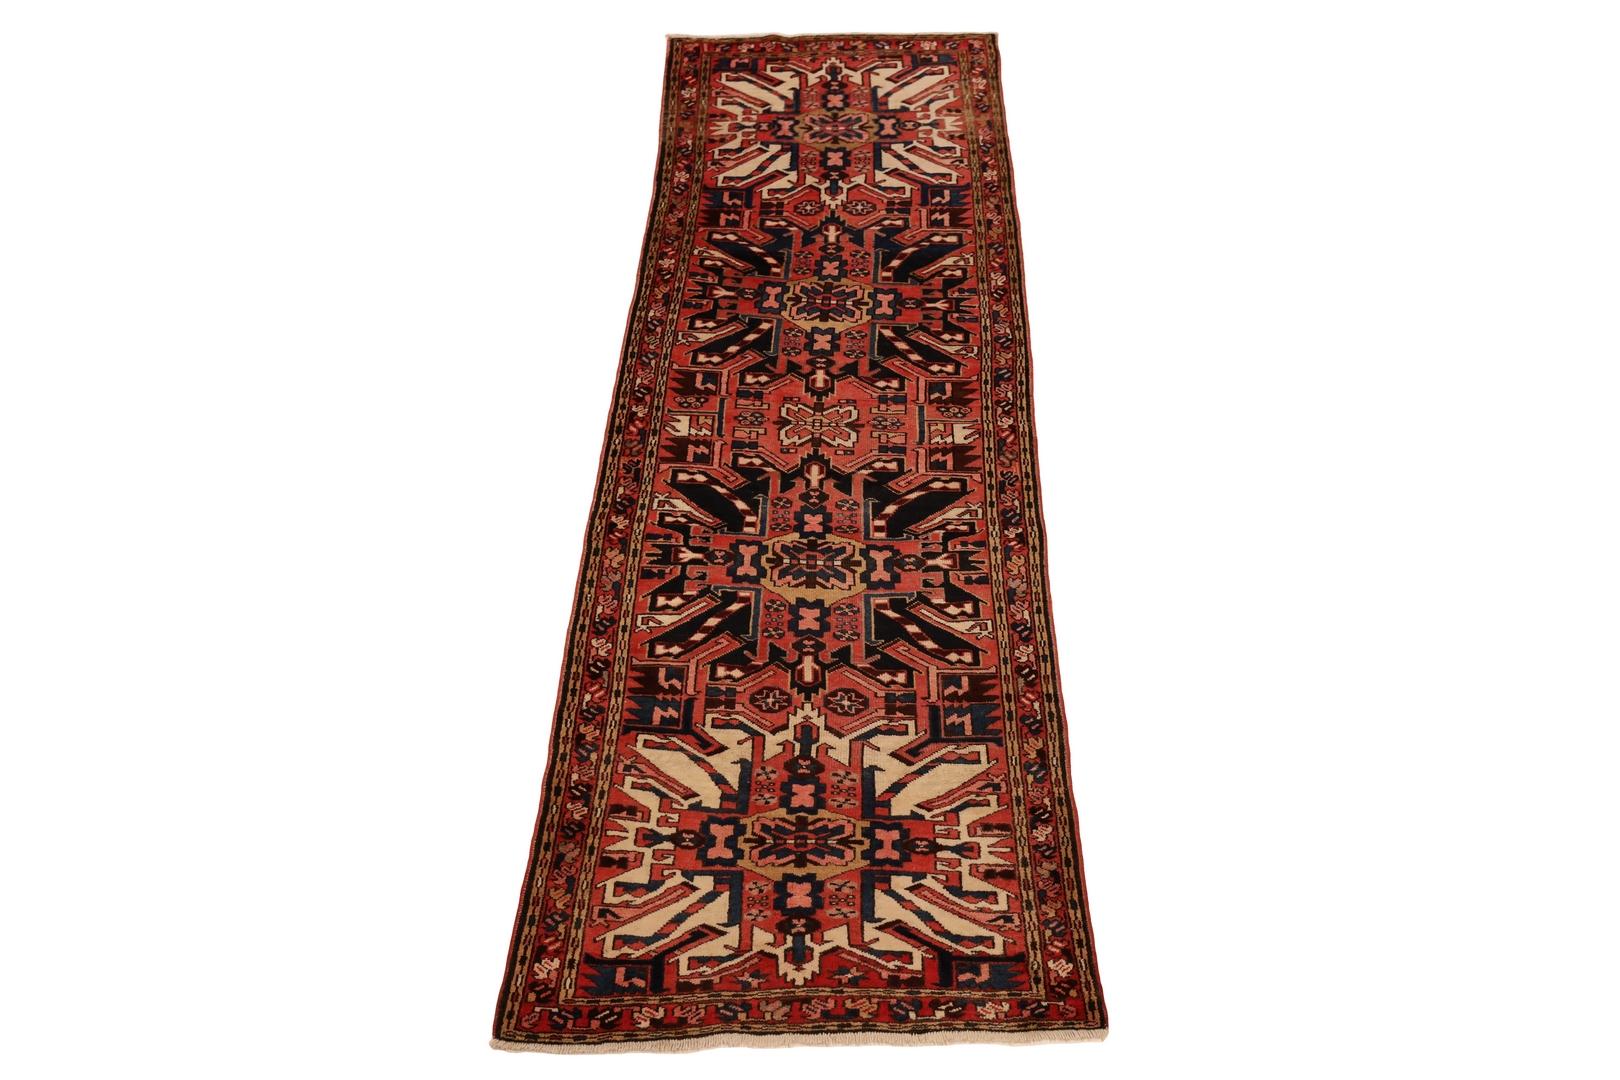 Indulge in the captivating allure of a Northwestern Persian Runner, a rug that effortlessly merges tradition with affordability. With a bold red background, this rug beckons attention and admiration. Its focal point features two grand ivory sun